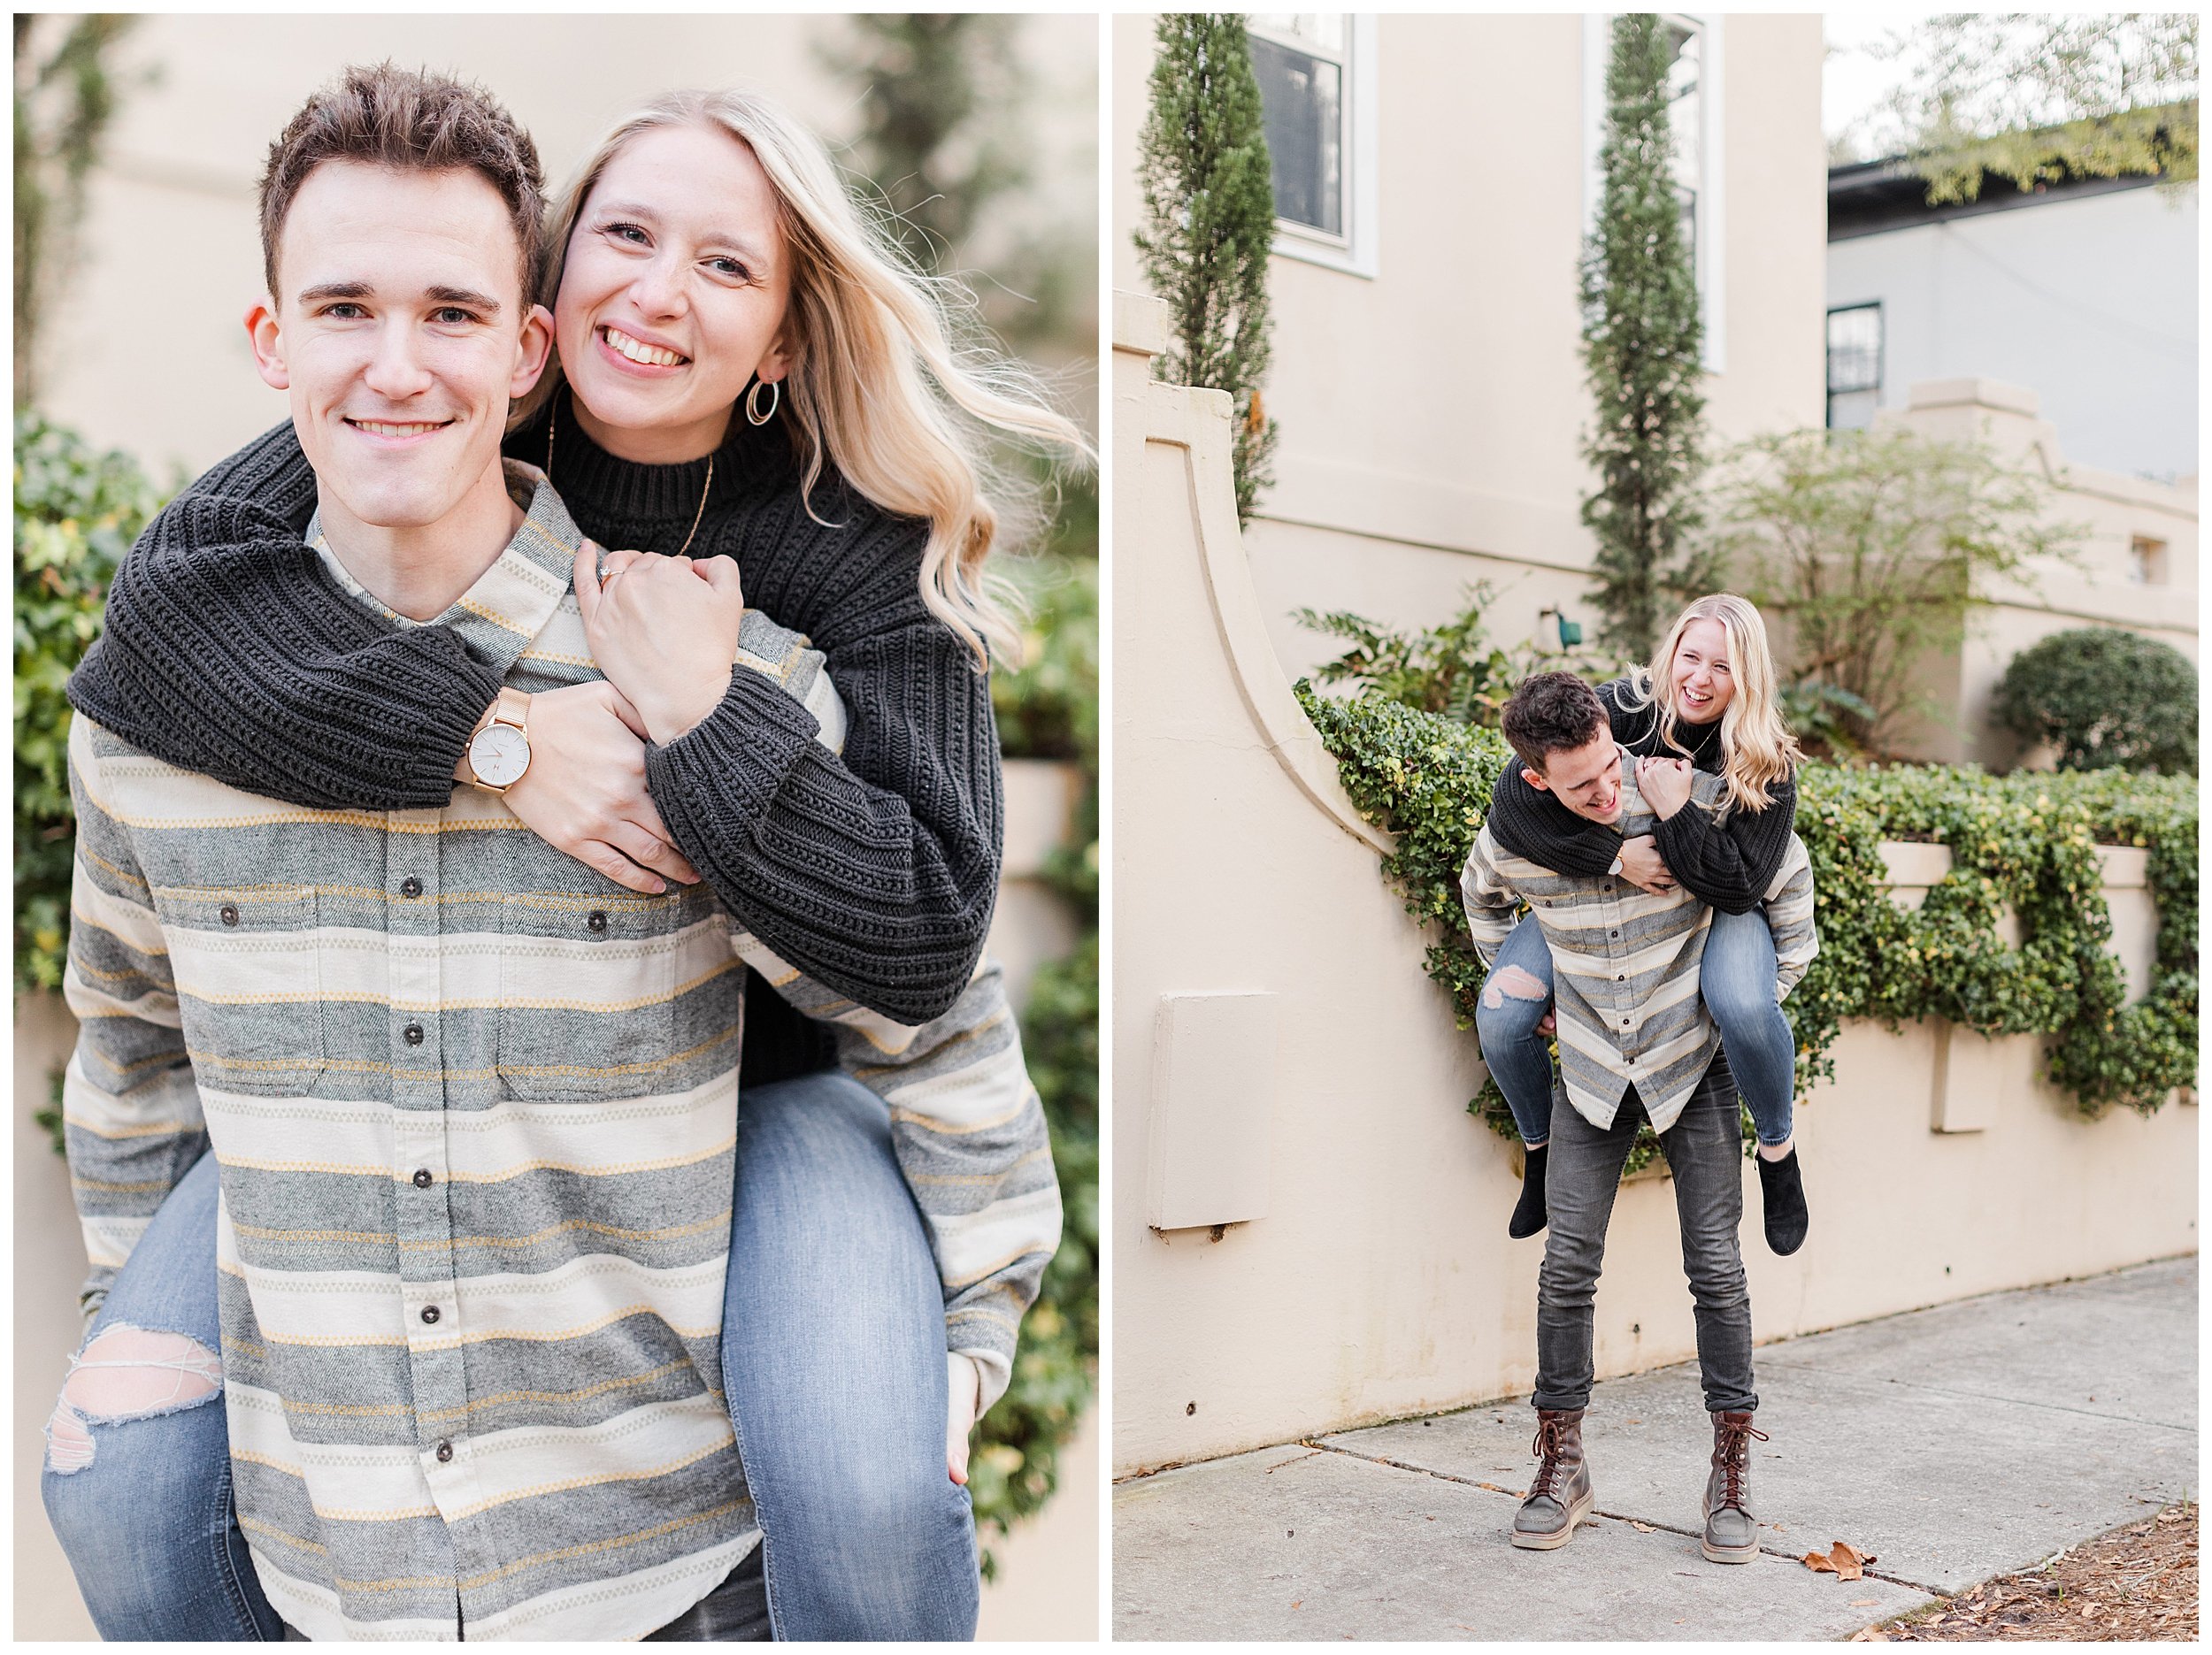 wilmington riverwalk and historic district engagement session ashley christ photography wilmington wedding photographer_0064.jpg